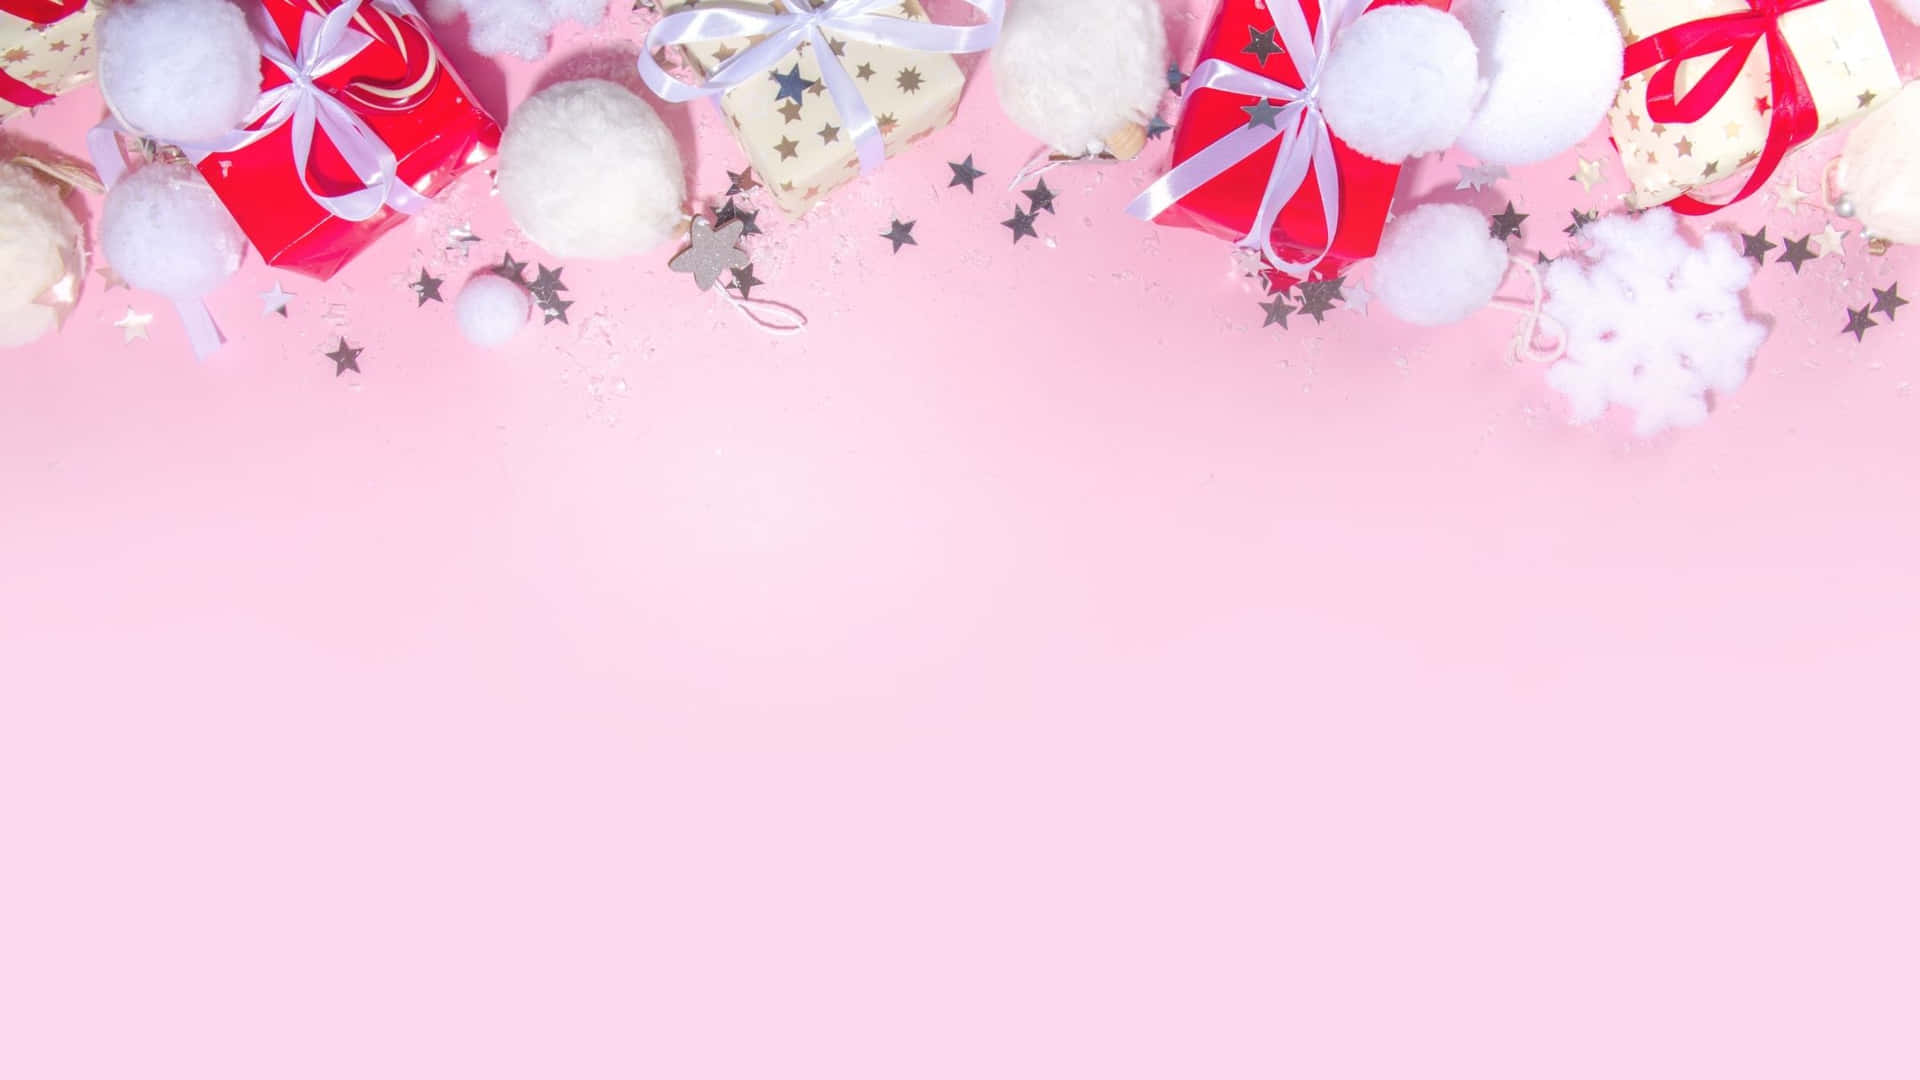 A beautiful pink Christmas background, perfect for a festive winter